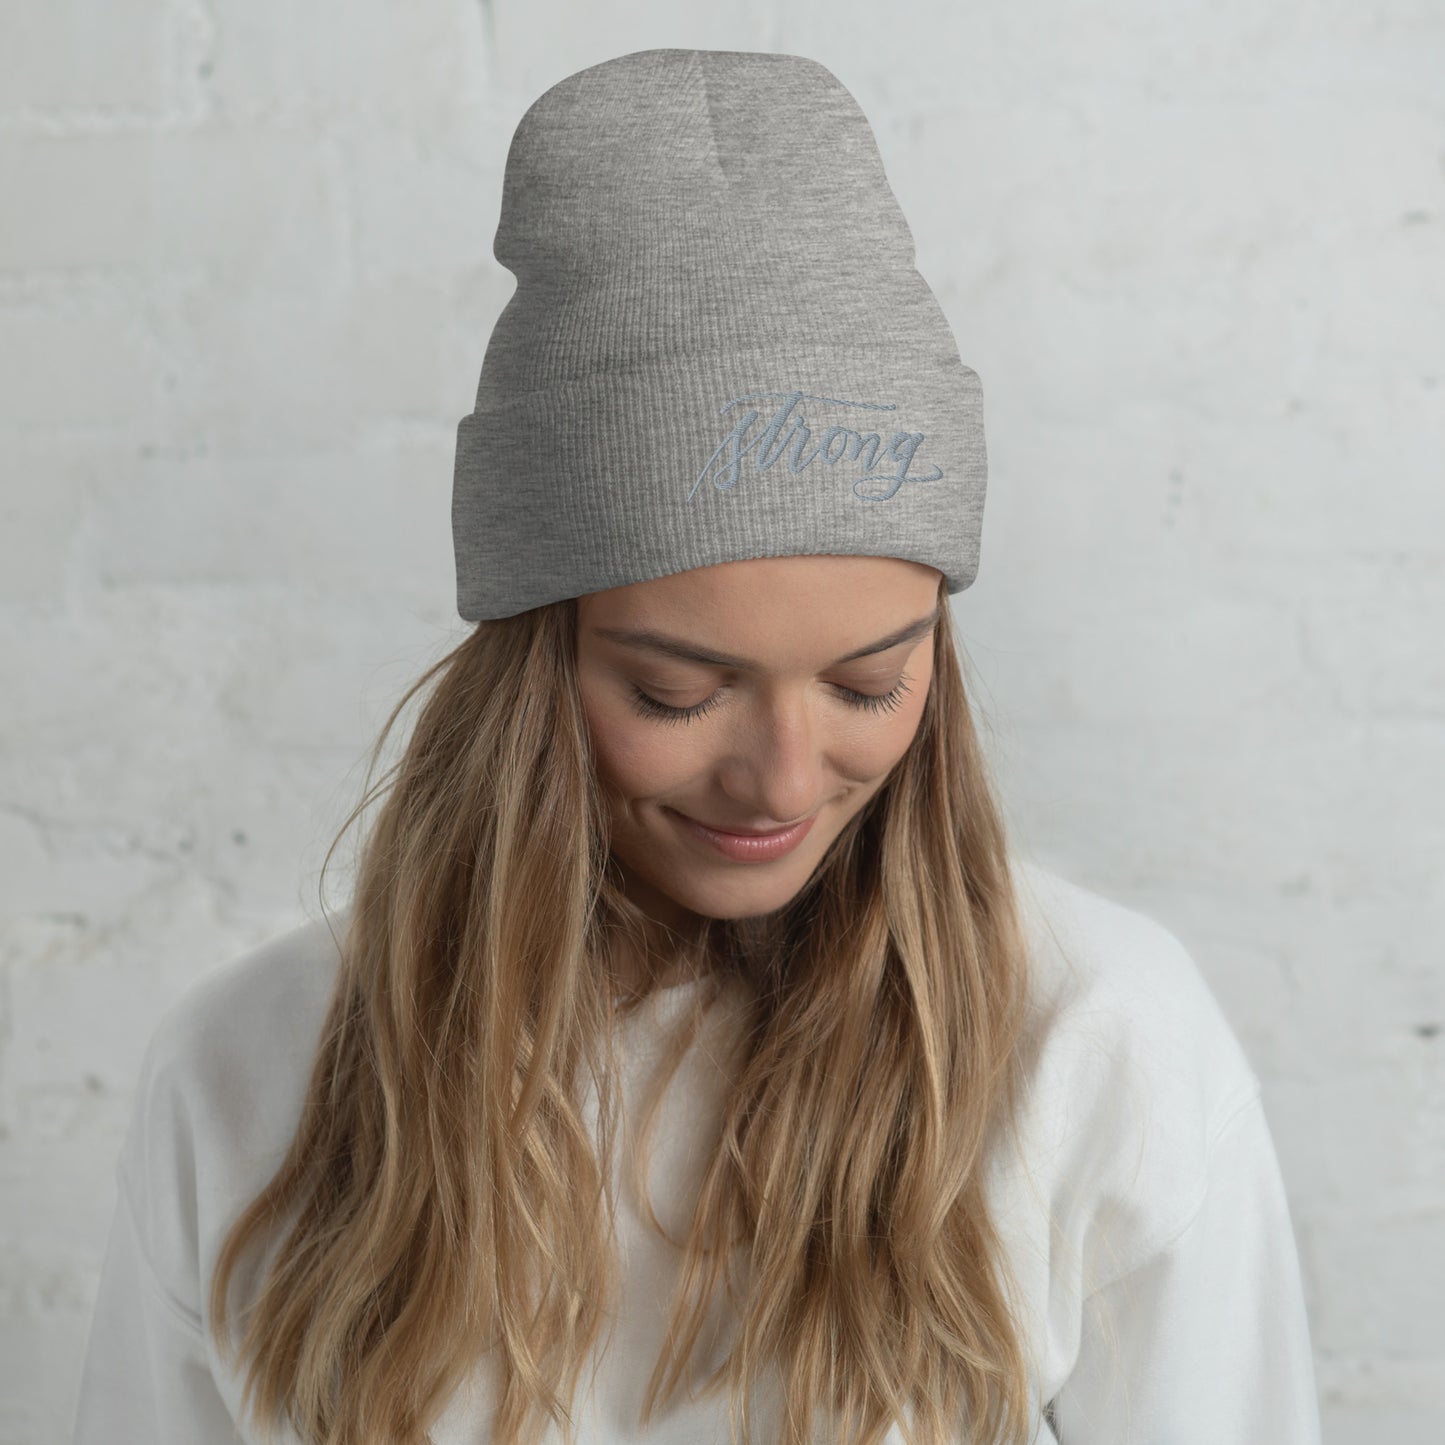 Embroidered Grey Script "Strong" Calligraphy on Grey Cuffed Beanie